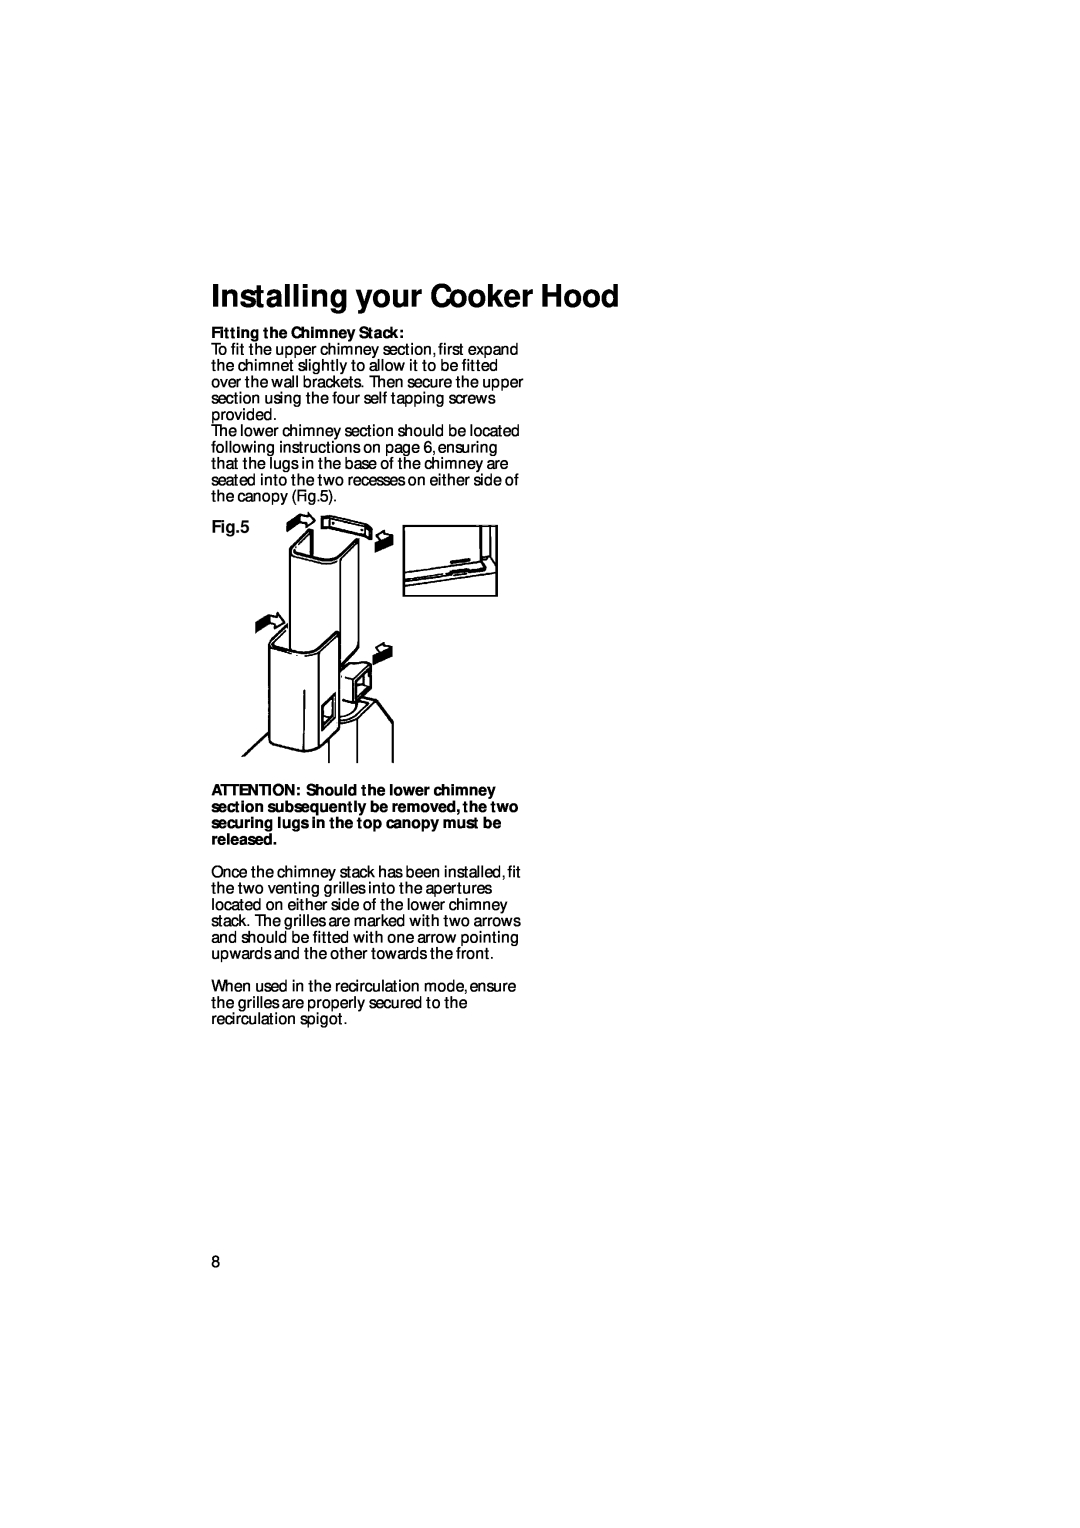 Creda CRC90, CRC65 manual Installing your Cooker Hood, Fitting the Chimney Stack 